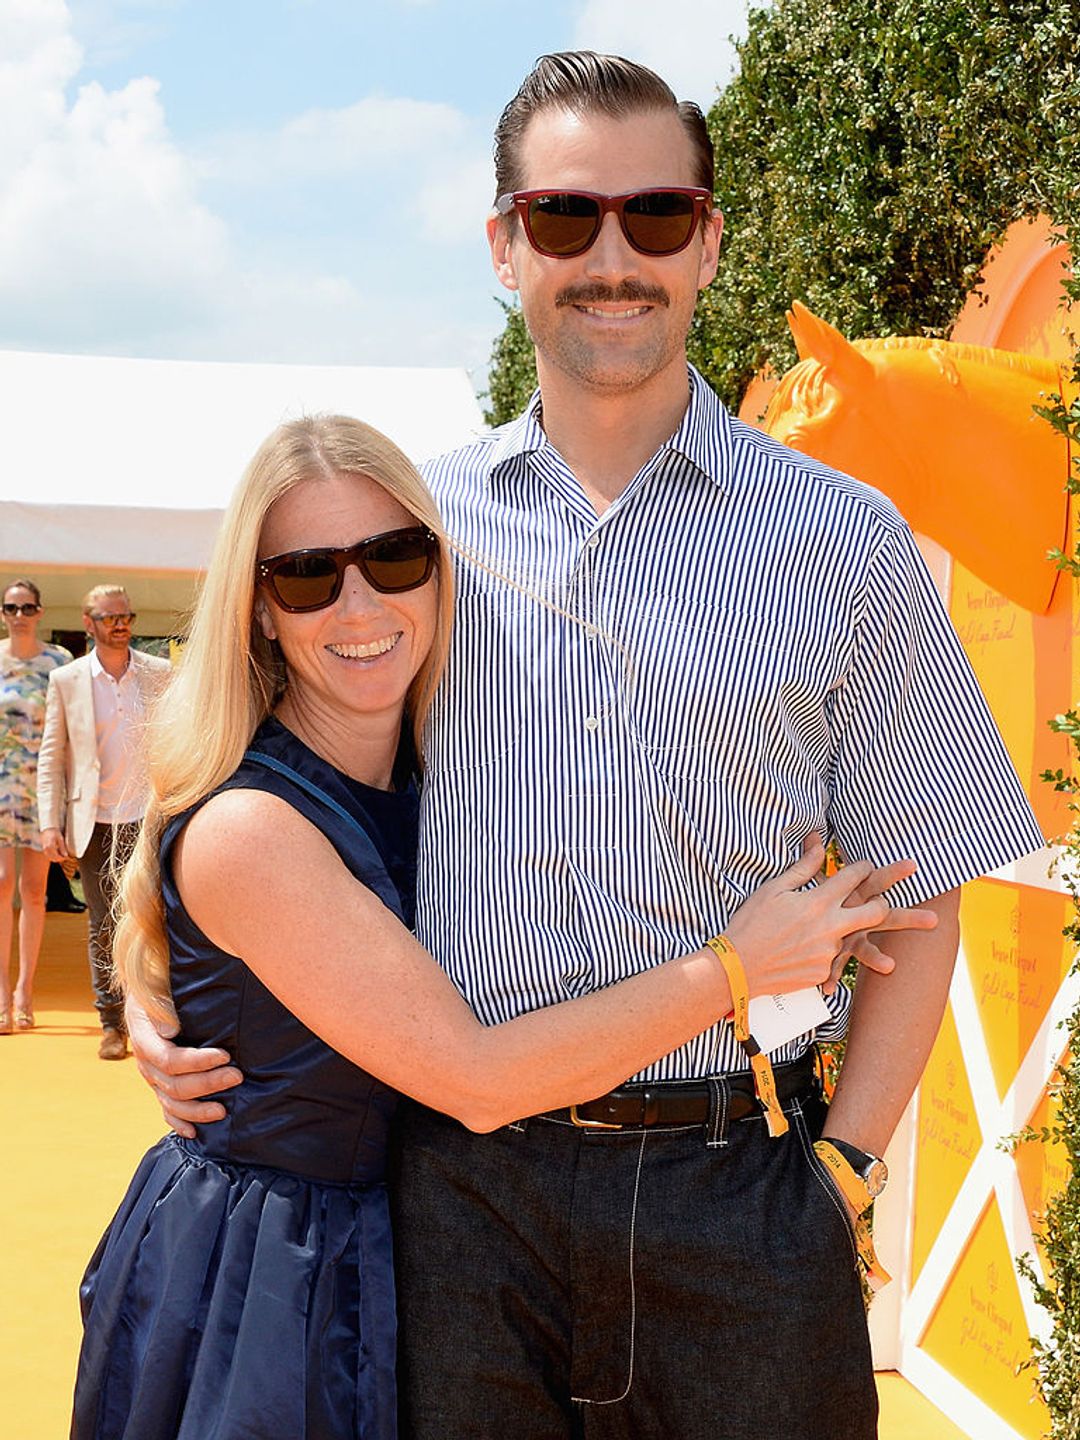 Katie Hillier and Patrick Grant attend the Veuve Clicquot Gold Cup Final in 2014